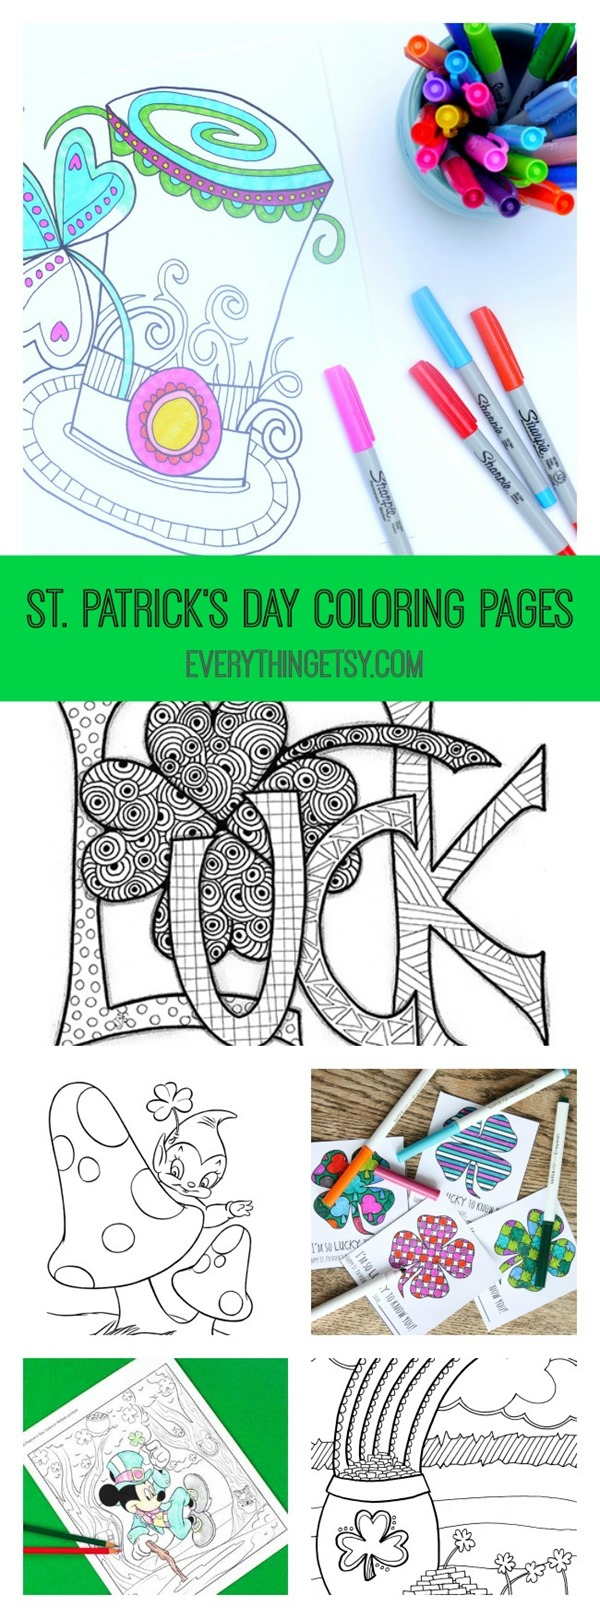 12 St. Patrick's Day Printable Coloring Pages for Adults & Kids at EverythingEtsy